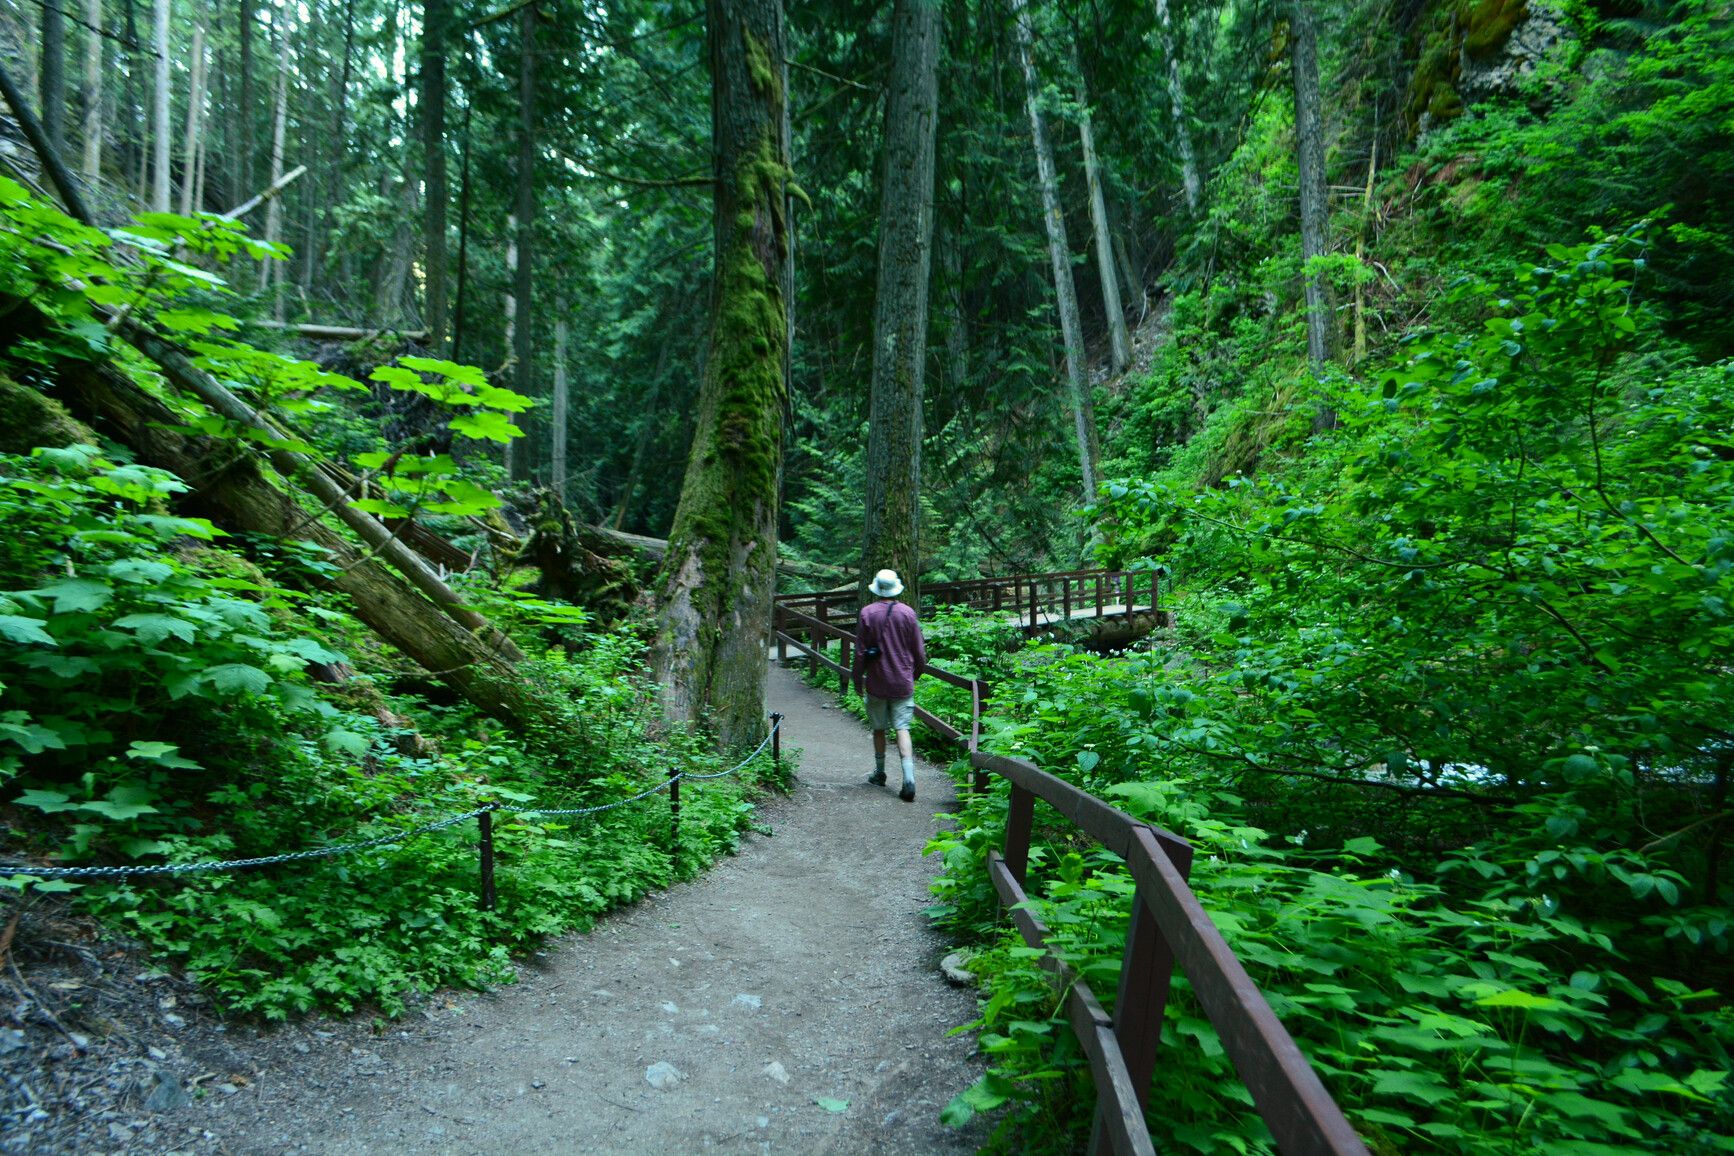 A visitor hiking a trail beside Reinecker Creek in Herald Park.